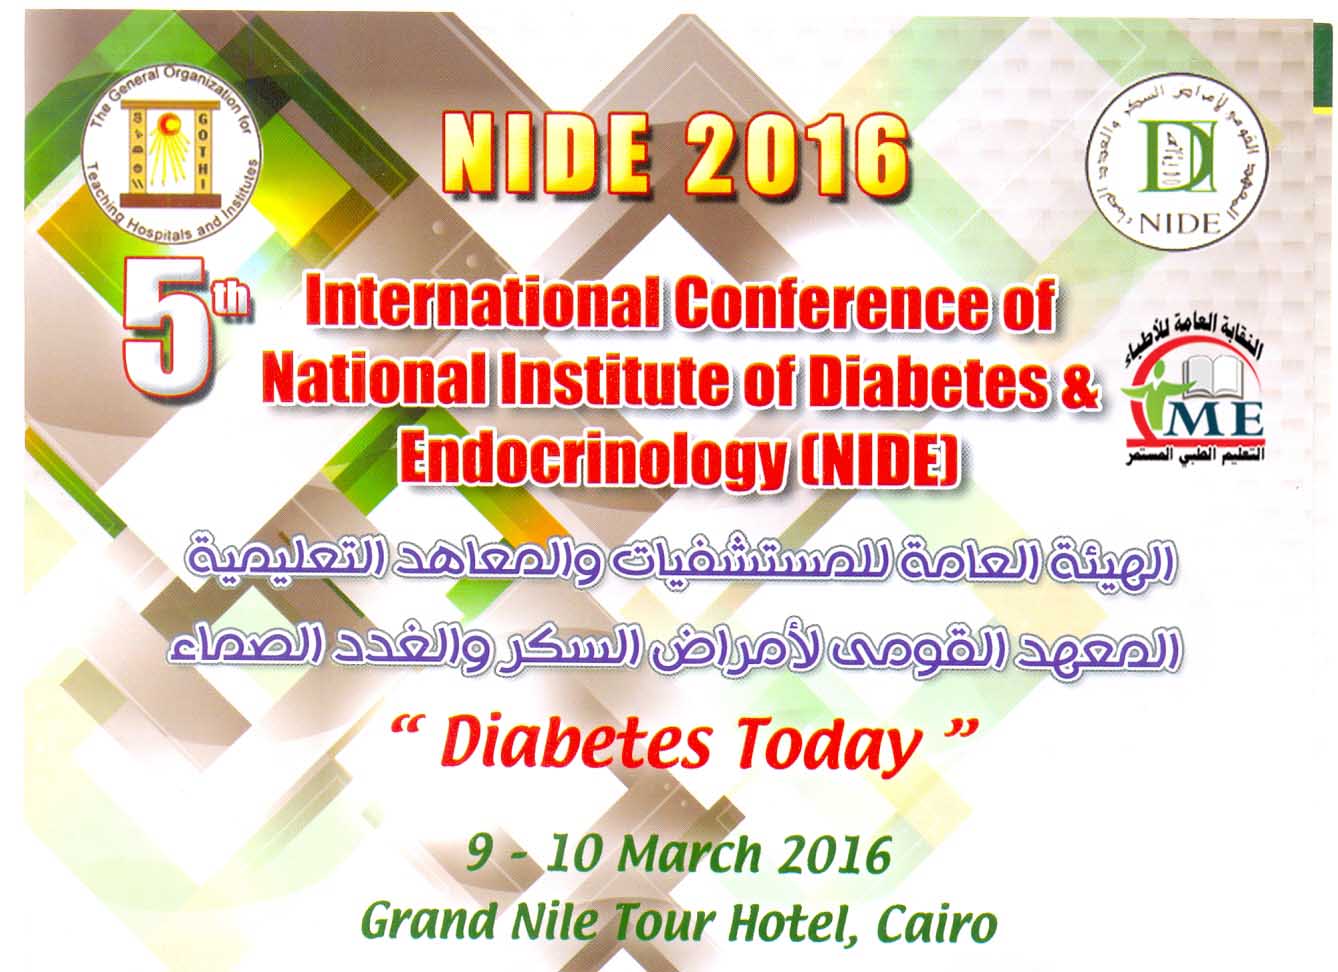 5th Internatonal Conference of National Institute of Diabetes & Endocrinology (NIDE)